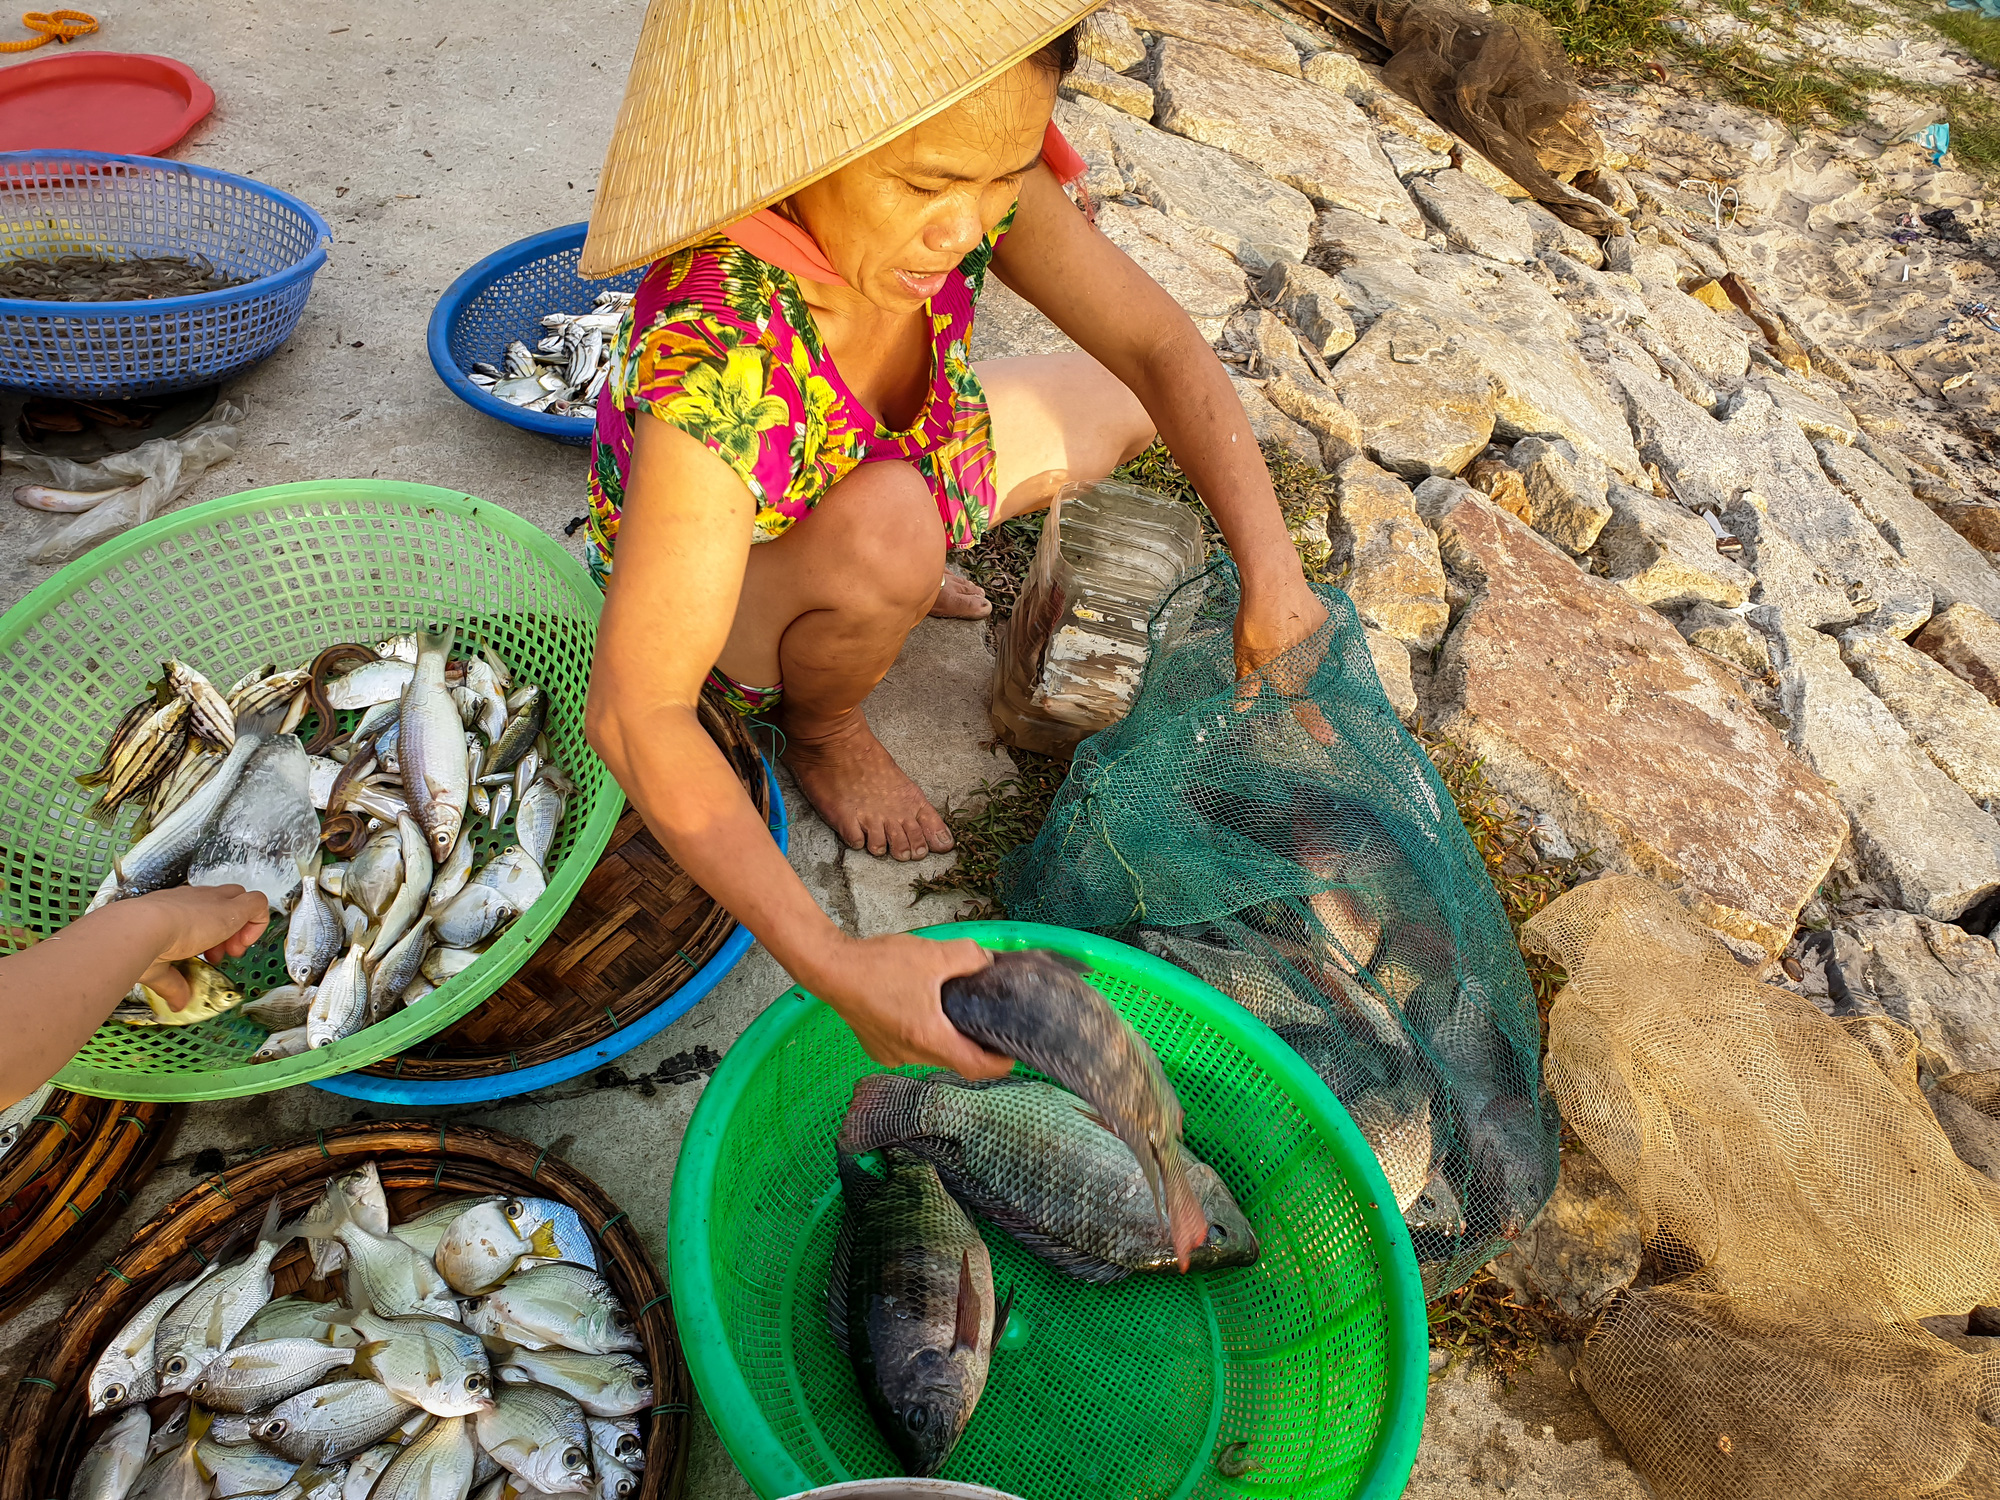 A local woman sells freshly caught fish in the Tam Giang Lagoon area in Thua Thien-Hue Province, Vietnam. Photo: Kelvin Long / Tuoi Tre